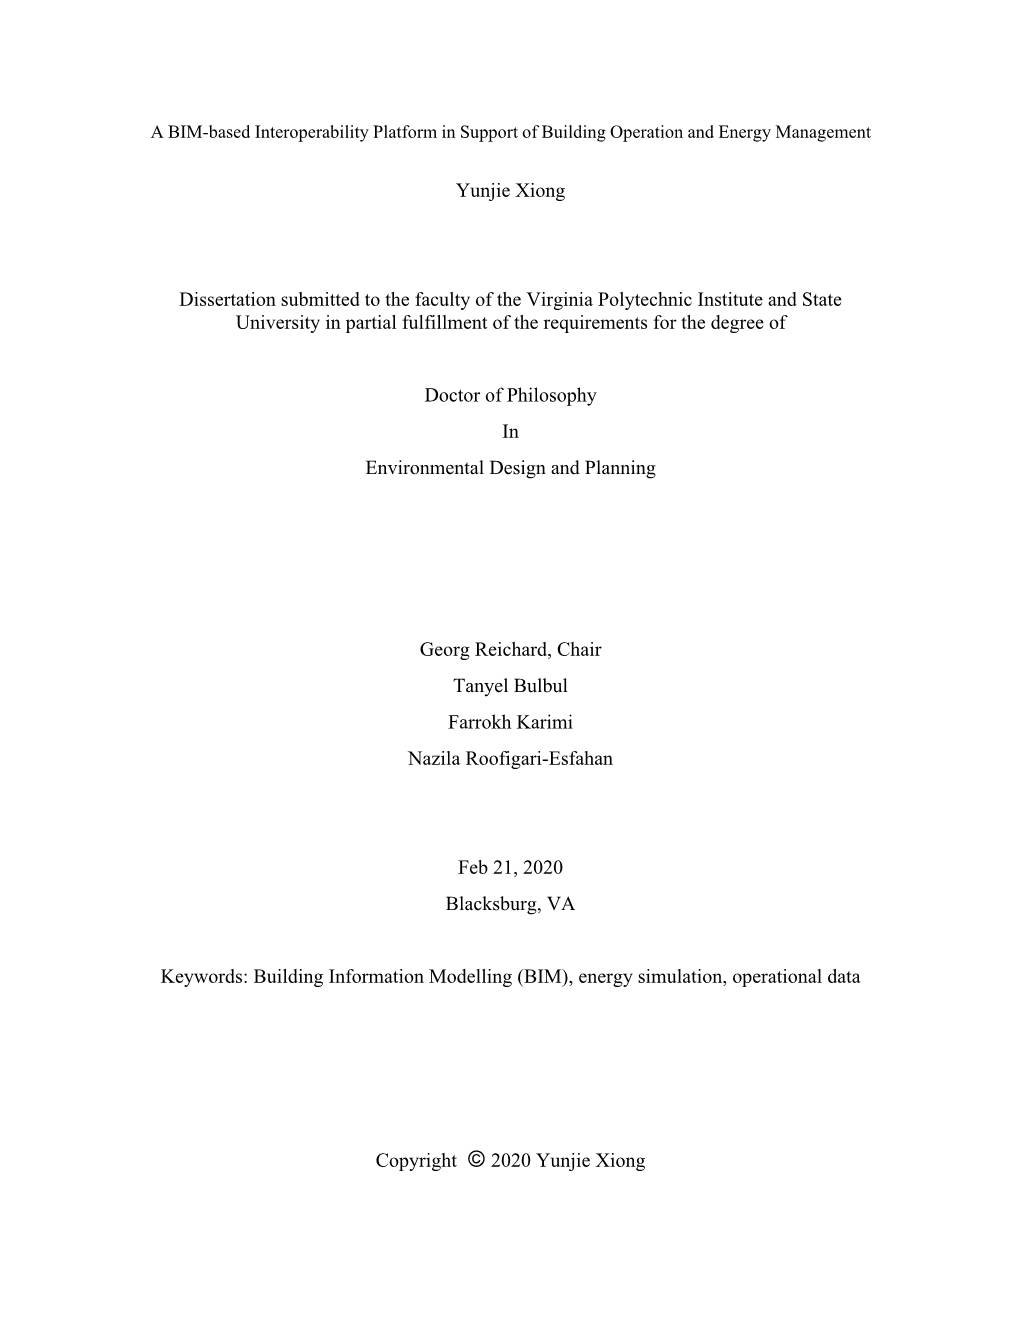 Yunjie Xiong Dissertation Submitted to the Faculty of the Virginia Polytechnic Institute and State University in Partial Fulfill